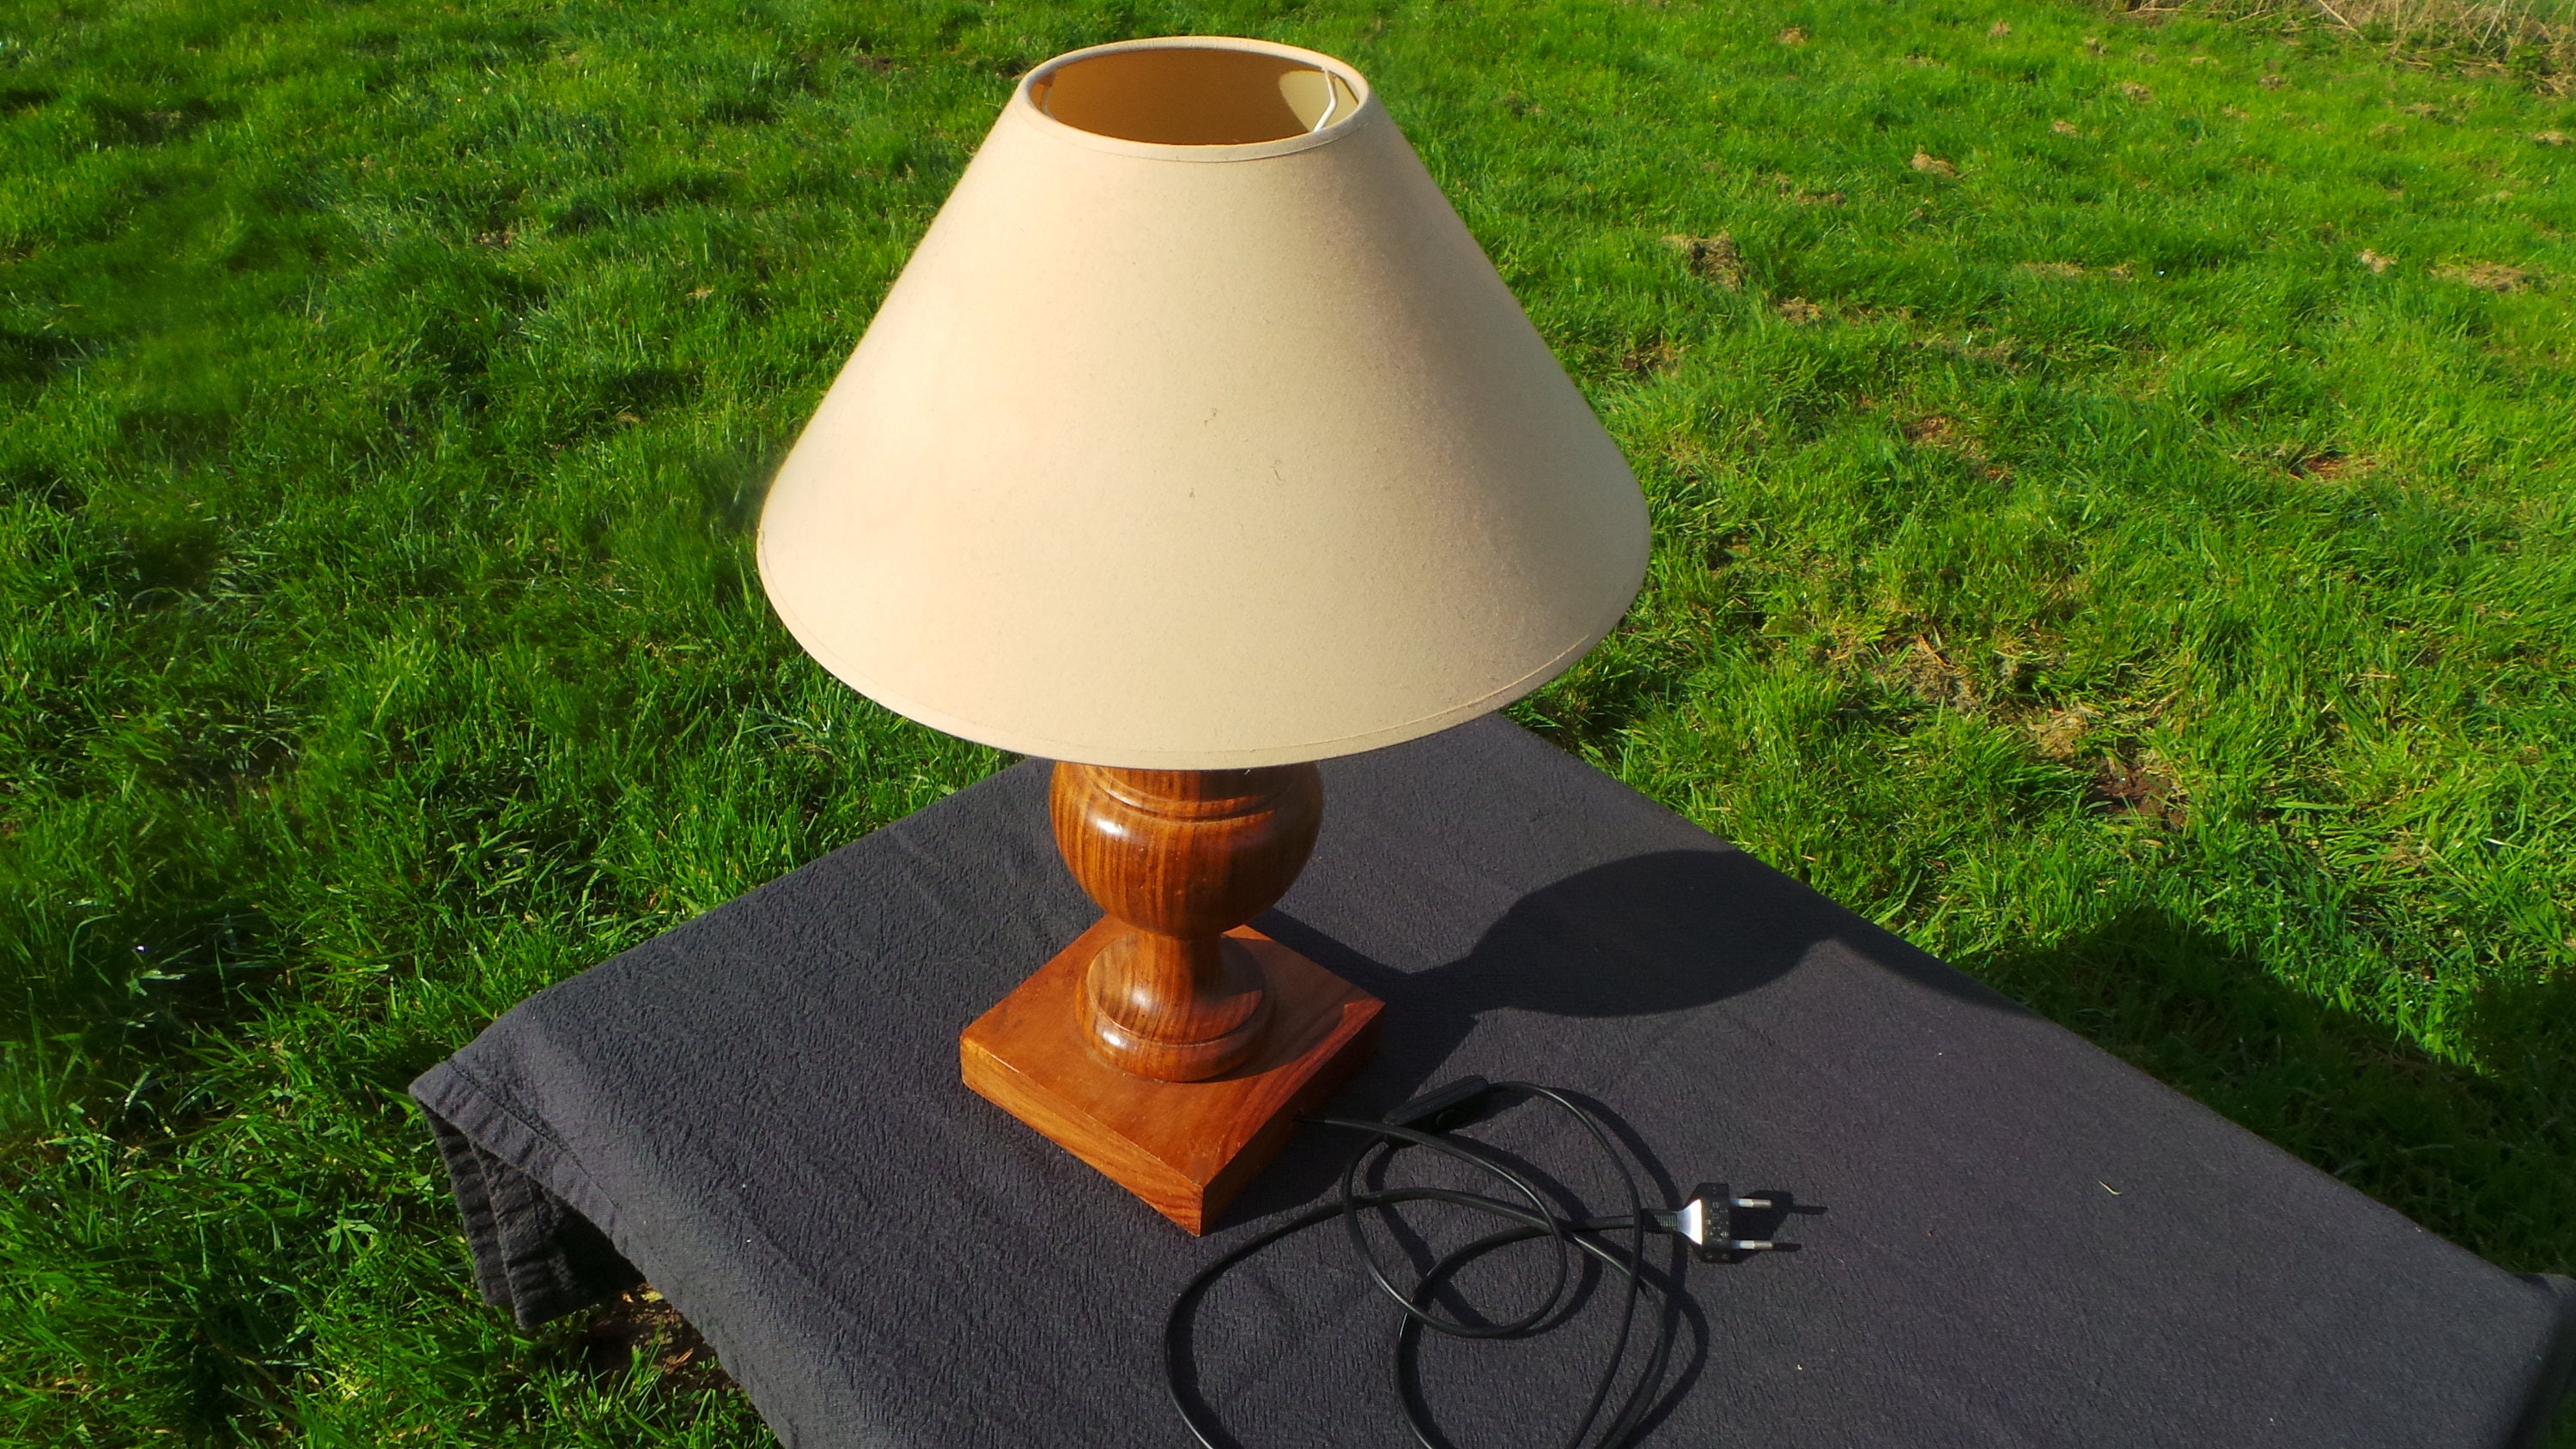 Vintage Rustic Shabby Chic Hand Made Carved Solid Wooden Desk Table Lamp Base